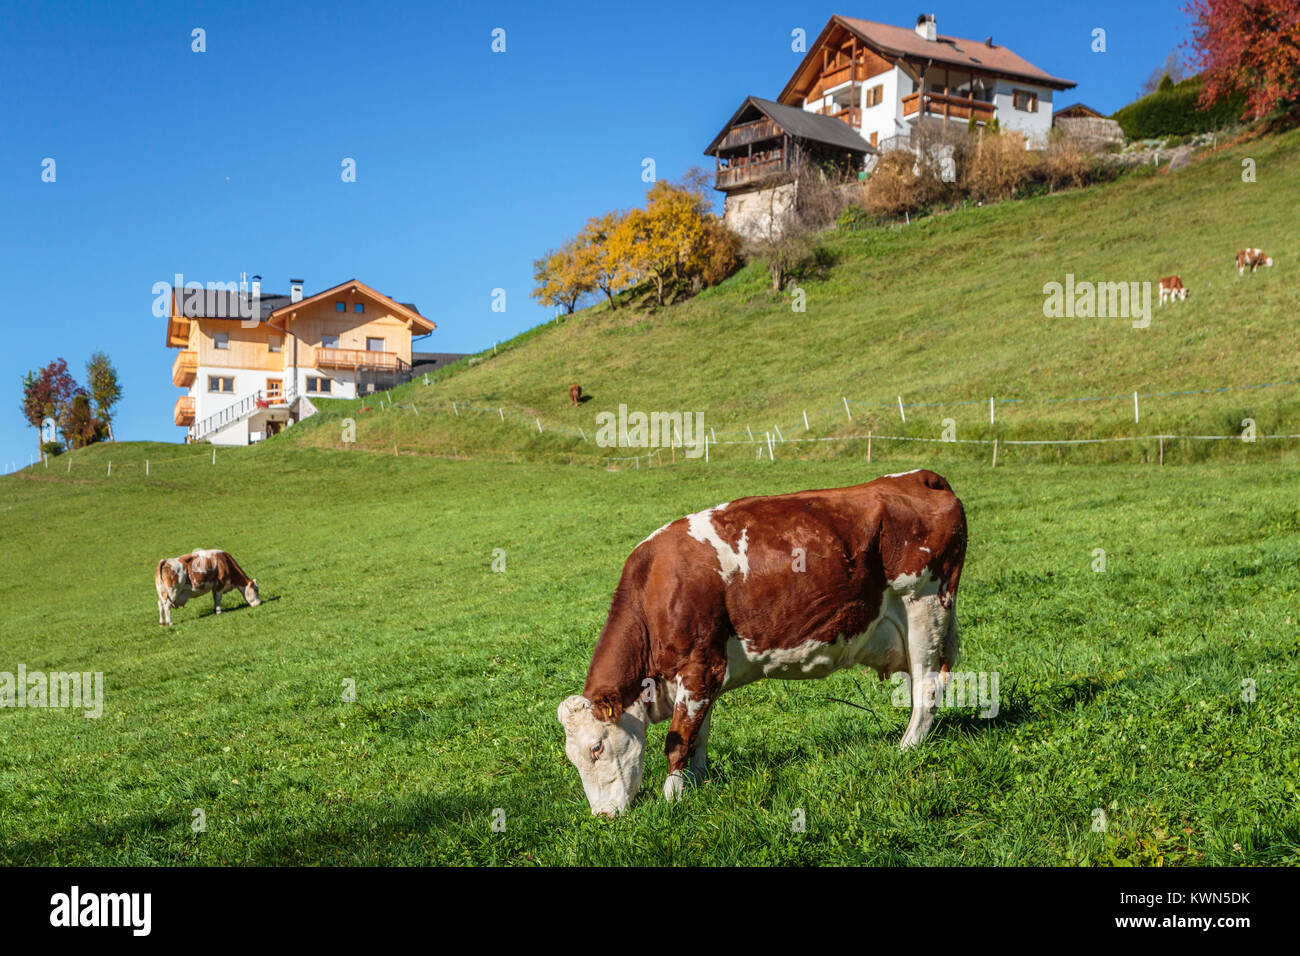 Cattle grazing in the pasture near the village of Santa Maddalena, South Tyrol, Italy, Europe. Stock Photo